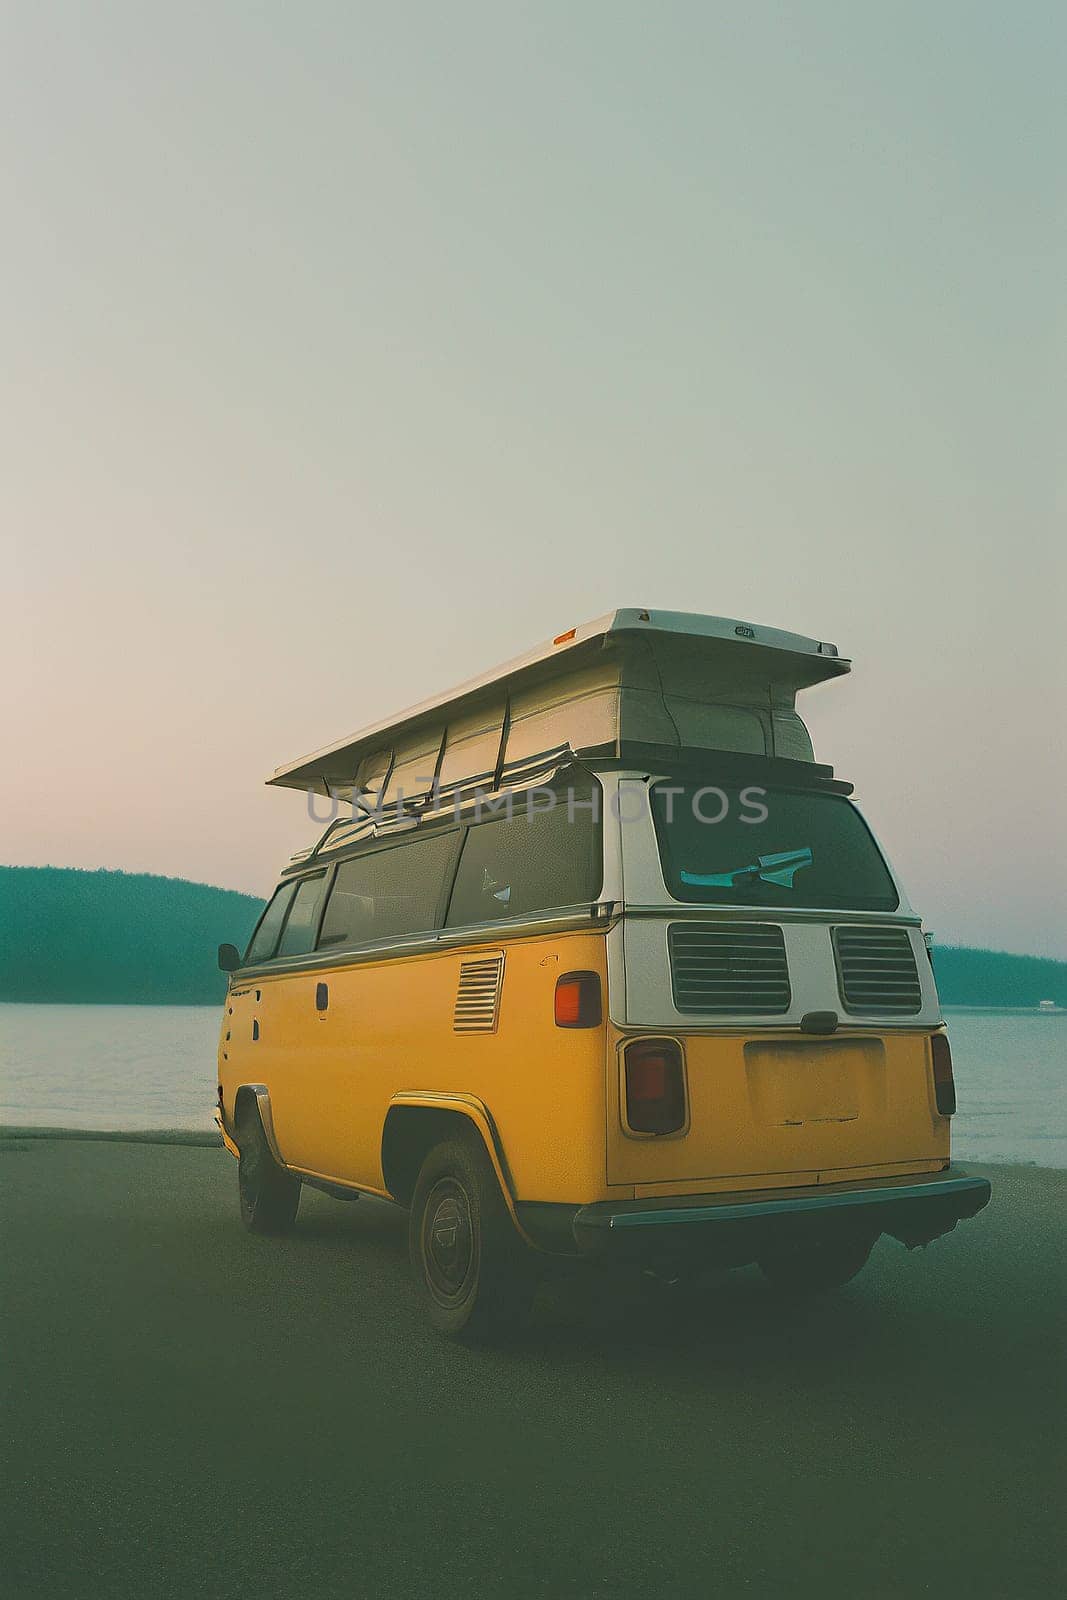 Traveling by car on the road. The concept of road travel in a mobile home. by Annu1tochka